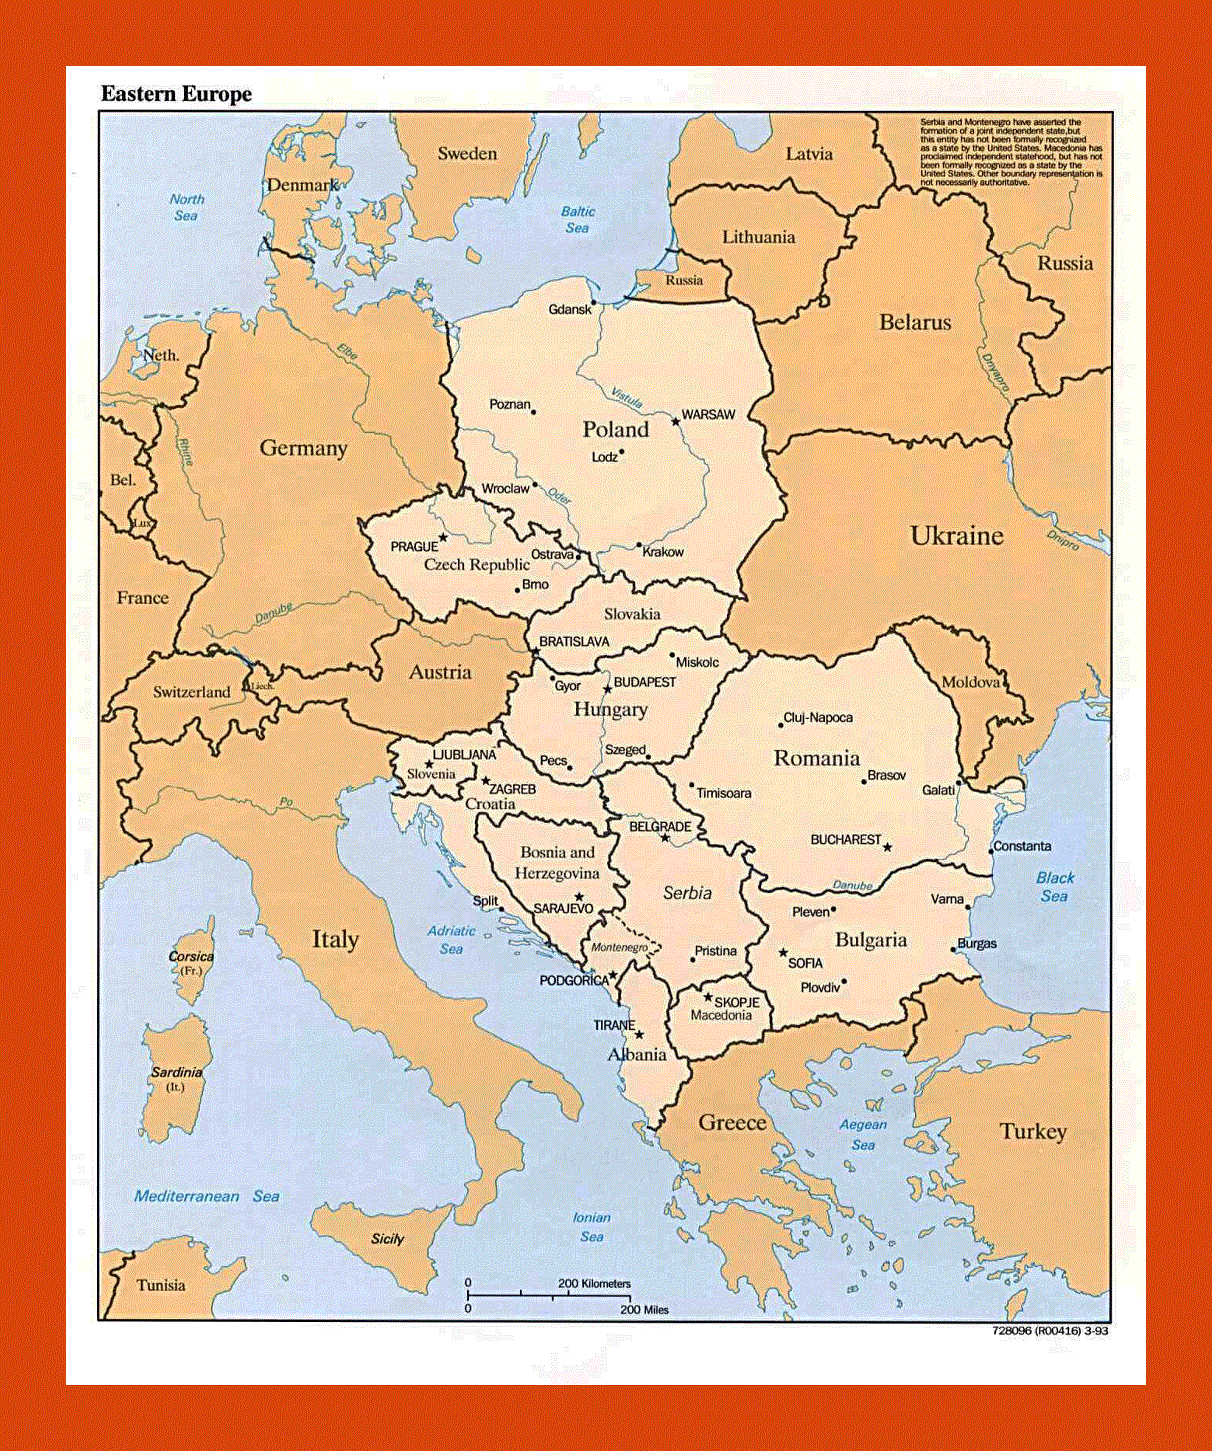 Political map of Eastern Europe - 1993